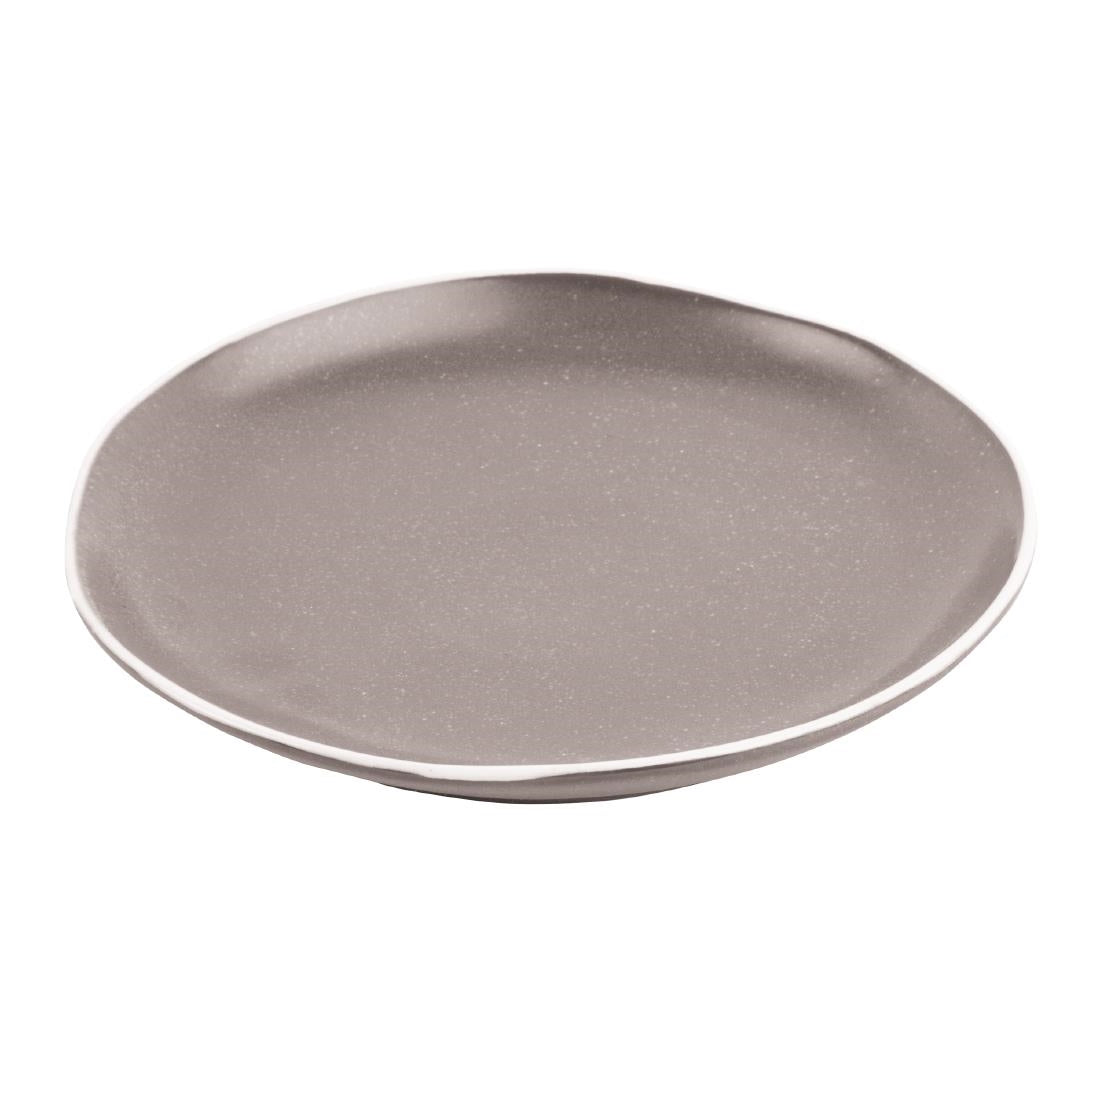 DR815 Olympia Chia Plates Charcoal 205mm (Pack of 6) JD Catering Equipment Solutions Ltd